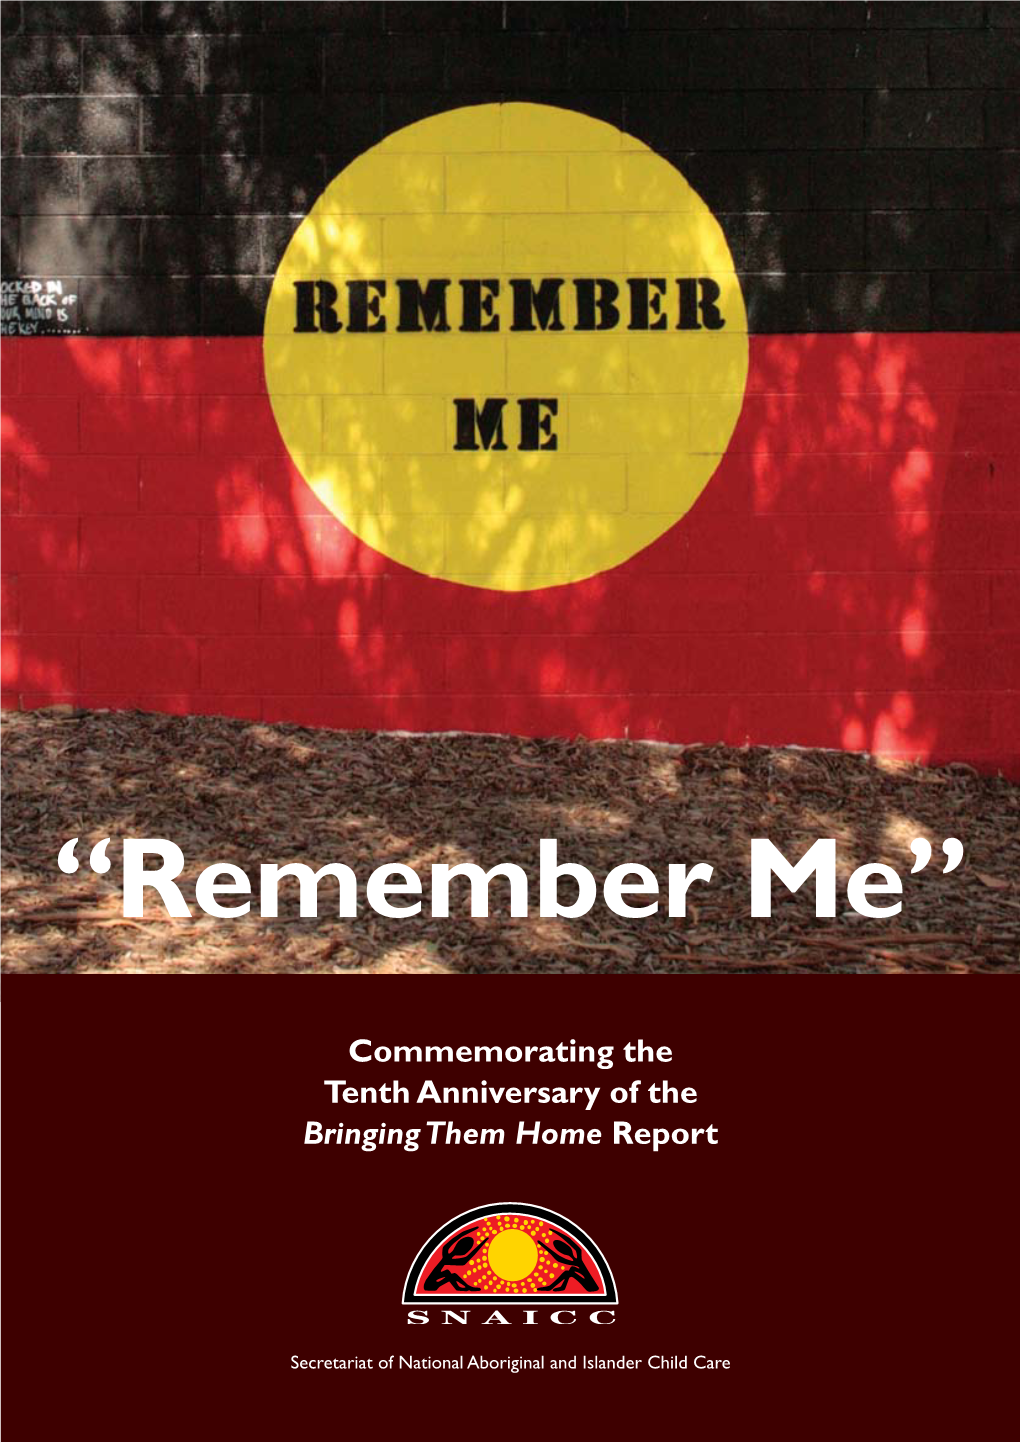 Commemorating the Tenth Anniversary of the Bringing Them Home Report